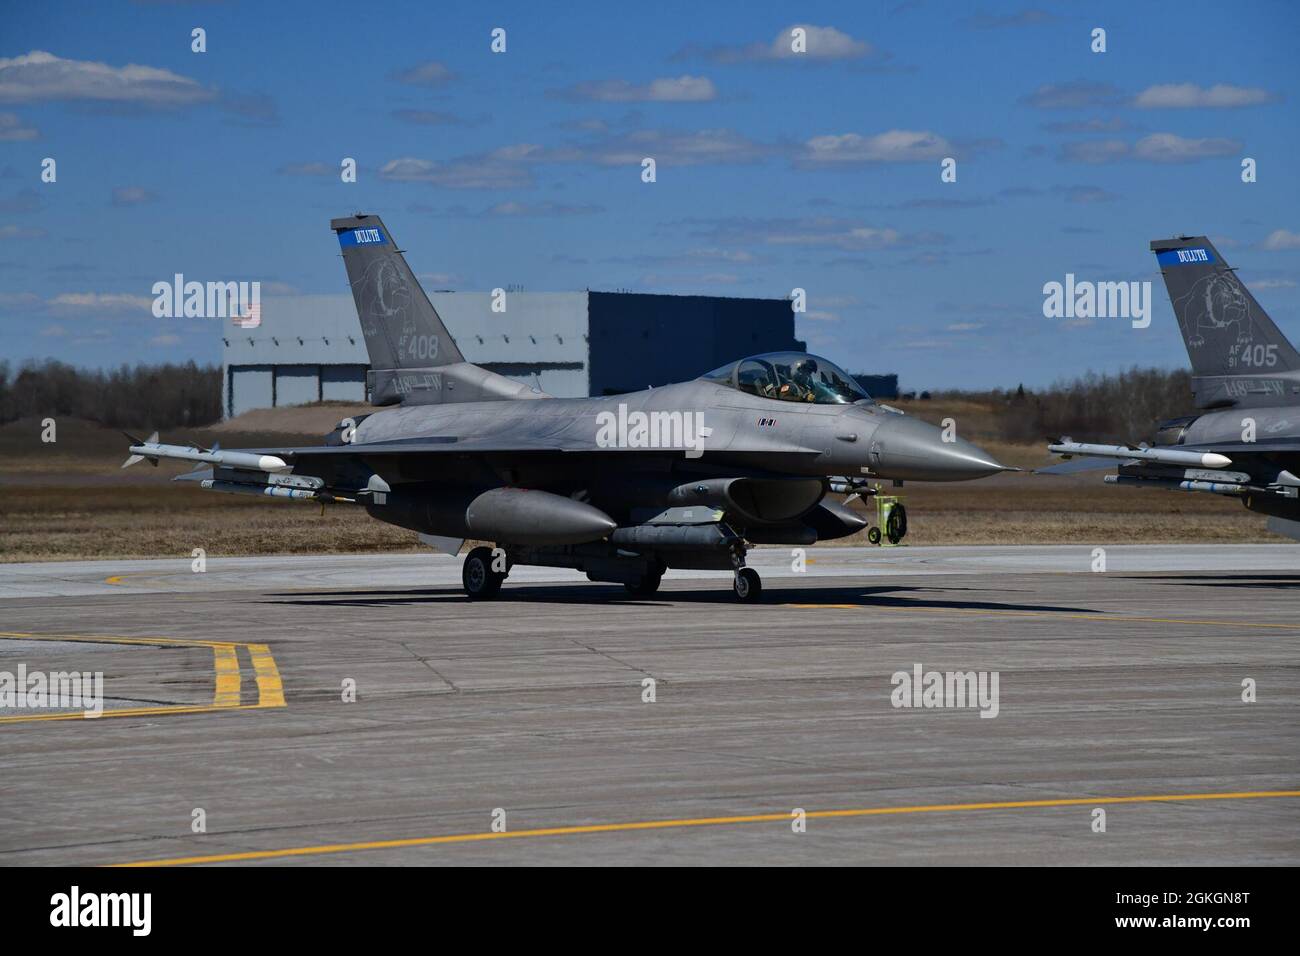 An F-16 Fighting Falcon of the 148th Fighter Wing stands ready to taxi from an End of Runway (EOR) inspection to the runway at the Duluth, Minn. Air National Guard Base April 17, 2021. EOR provides a final inspection of the aircraft prior to take off. Stock Photo